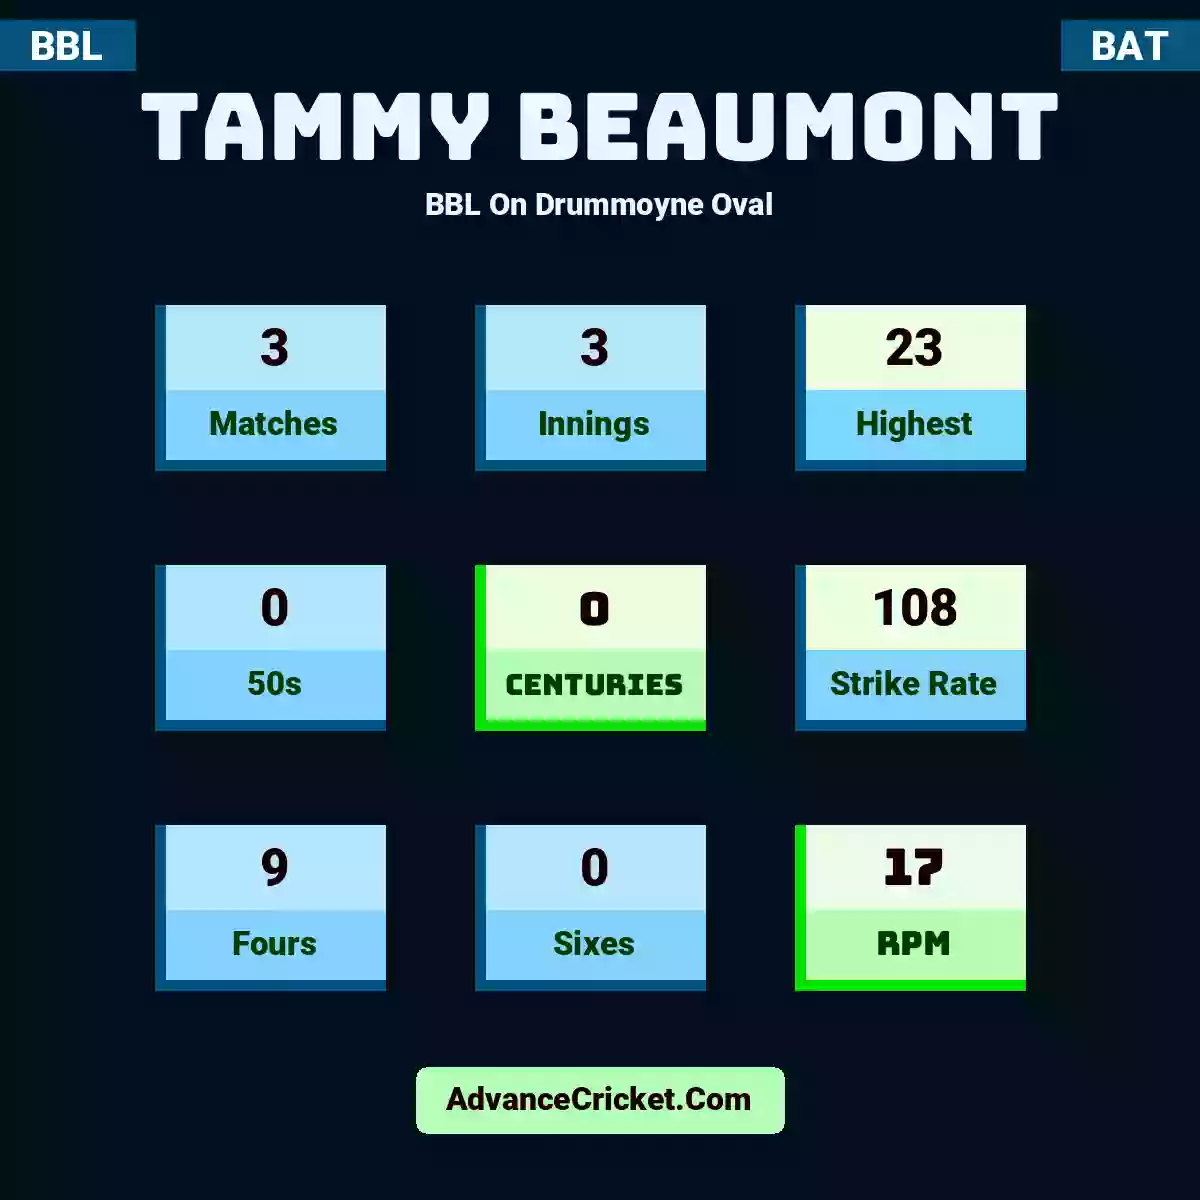 Tammy Beaumont BBL  On Drummoyne Oval, Tammy Beaumont played 3 matches, scored 23 runs as highest, 0 half-centuries, and 0 centuries, with a strike rate of 108. T.Beaumont hit 9 fours and 0 sixes, with an RPM of 17.